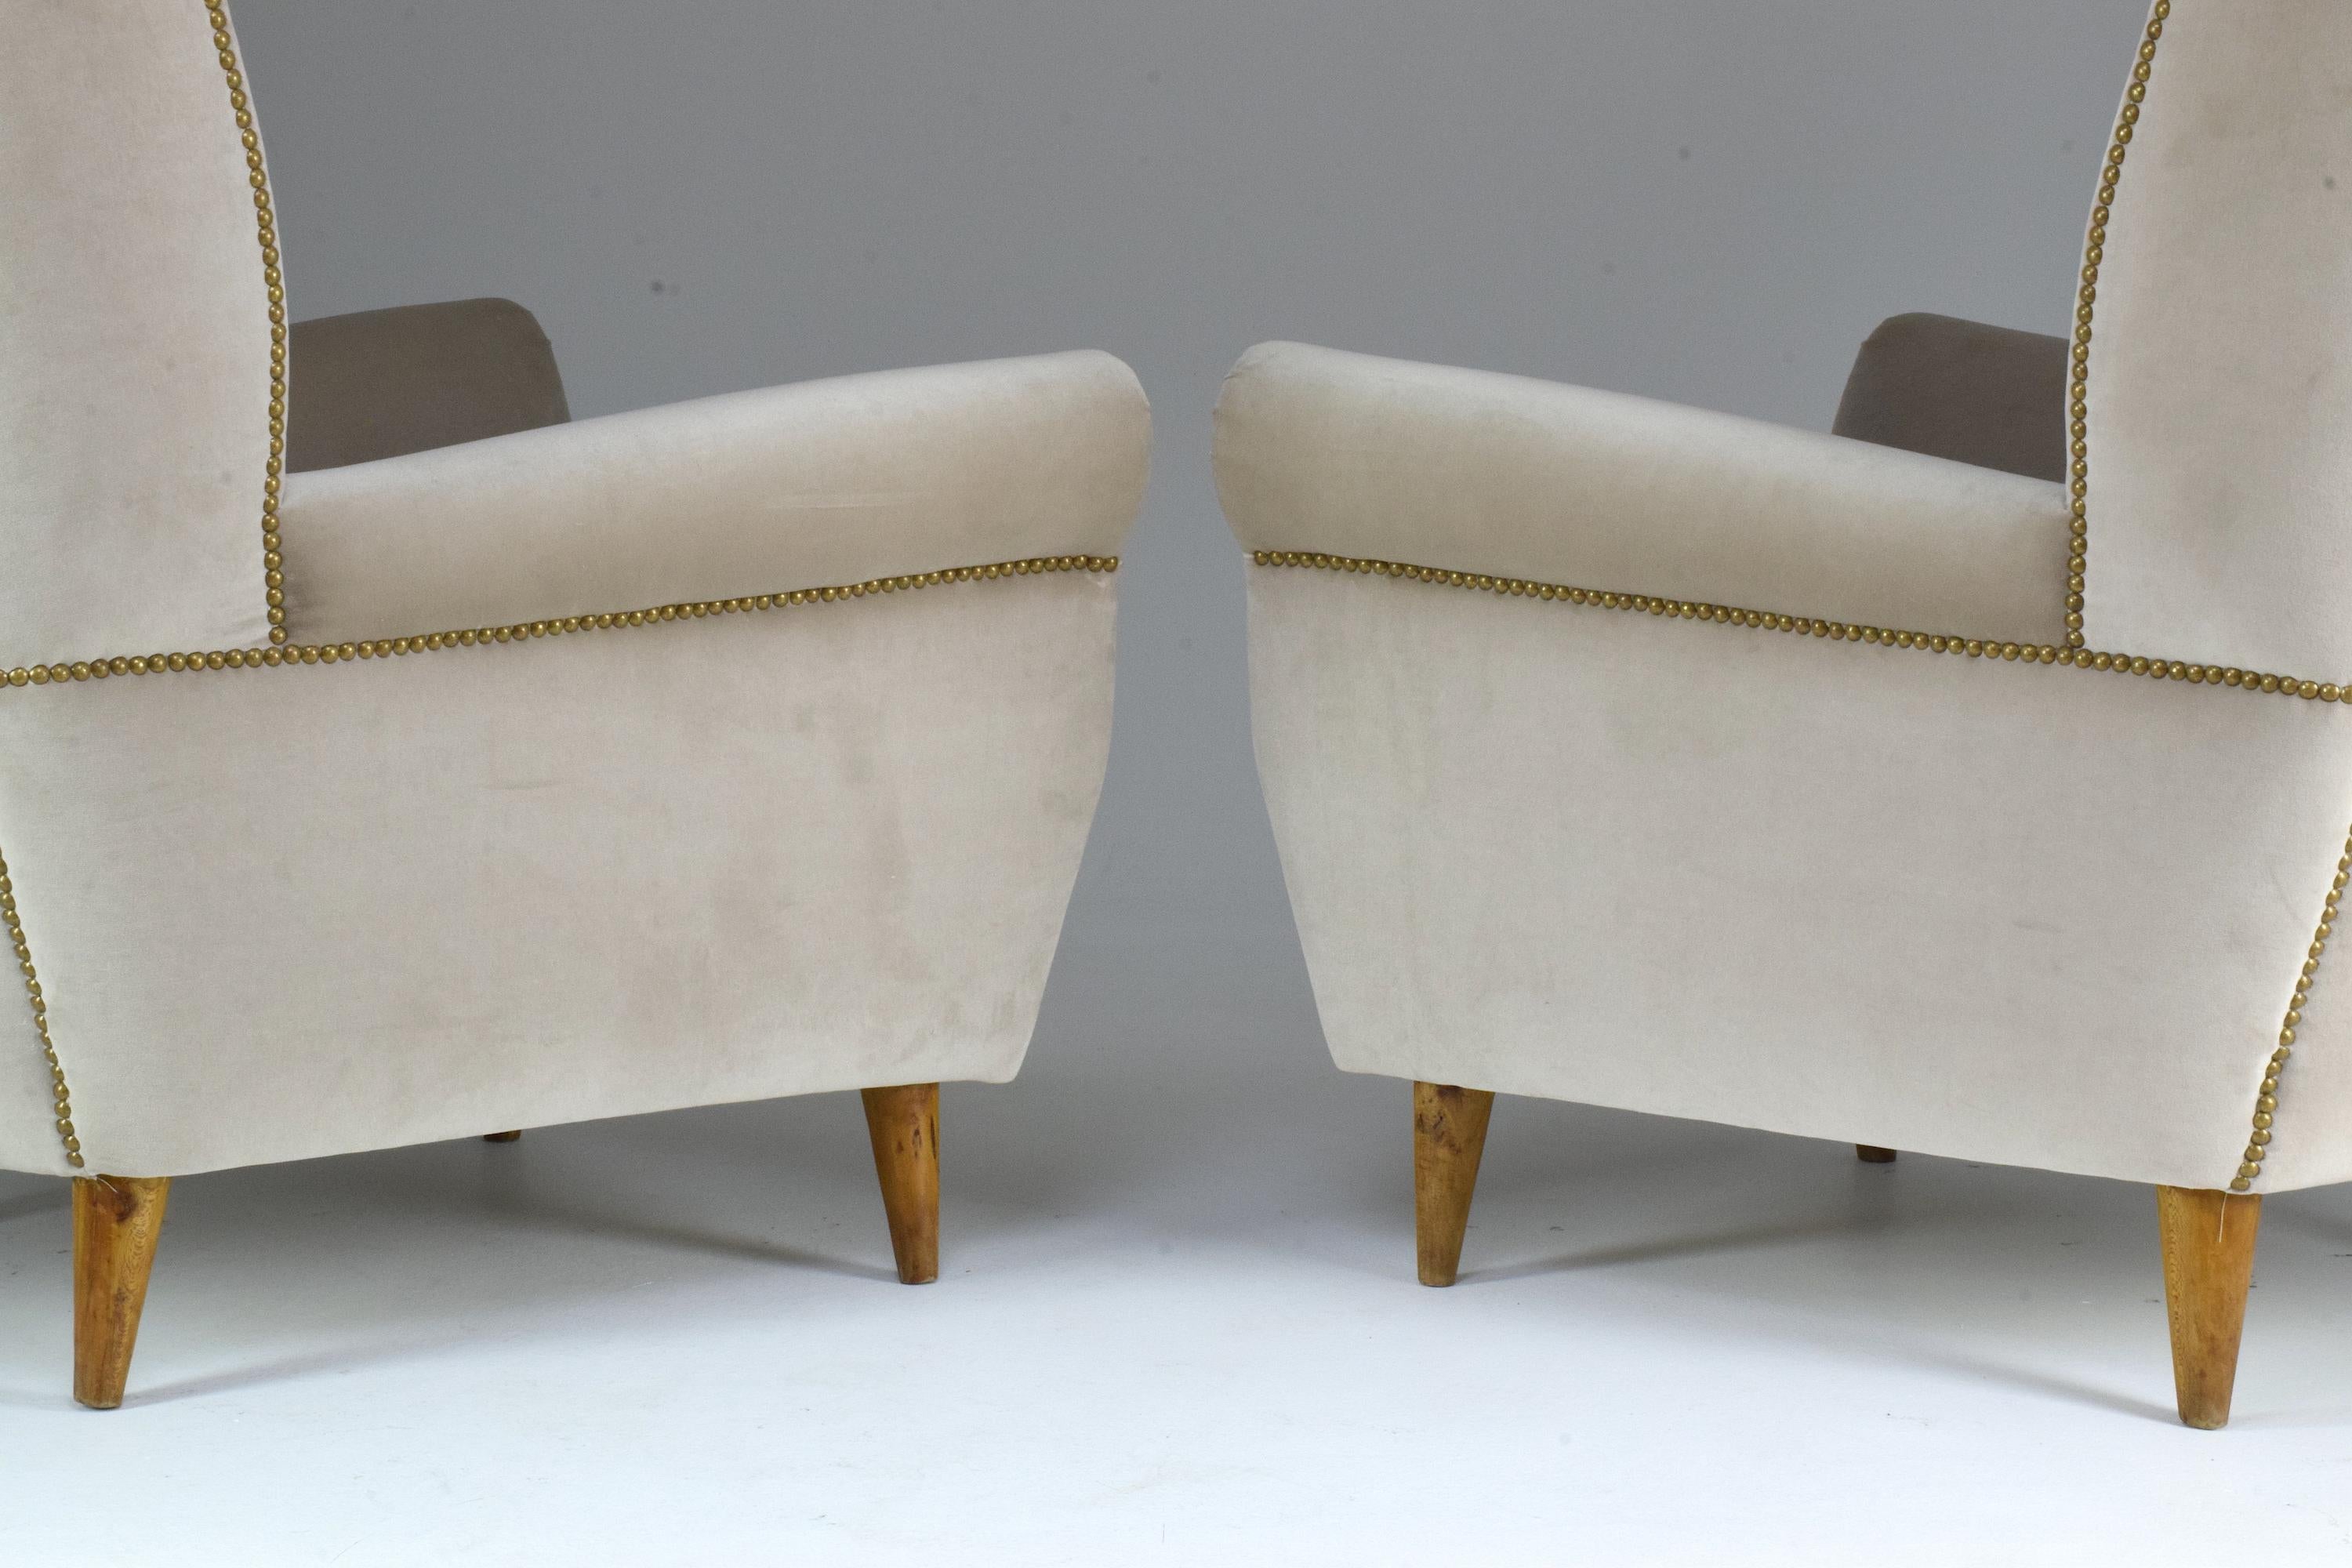 Pair of 20th Century Armchairs by Gio Ponti, 1940s For Sale 6